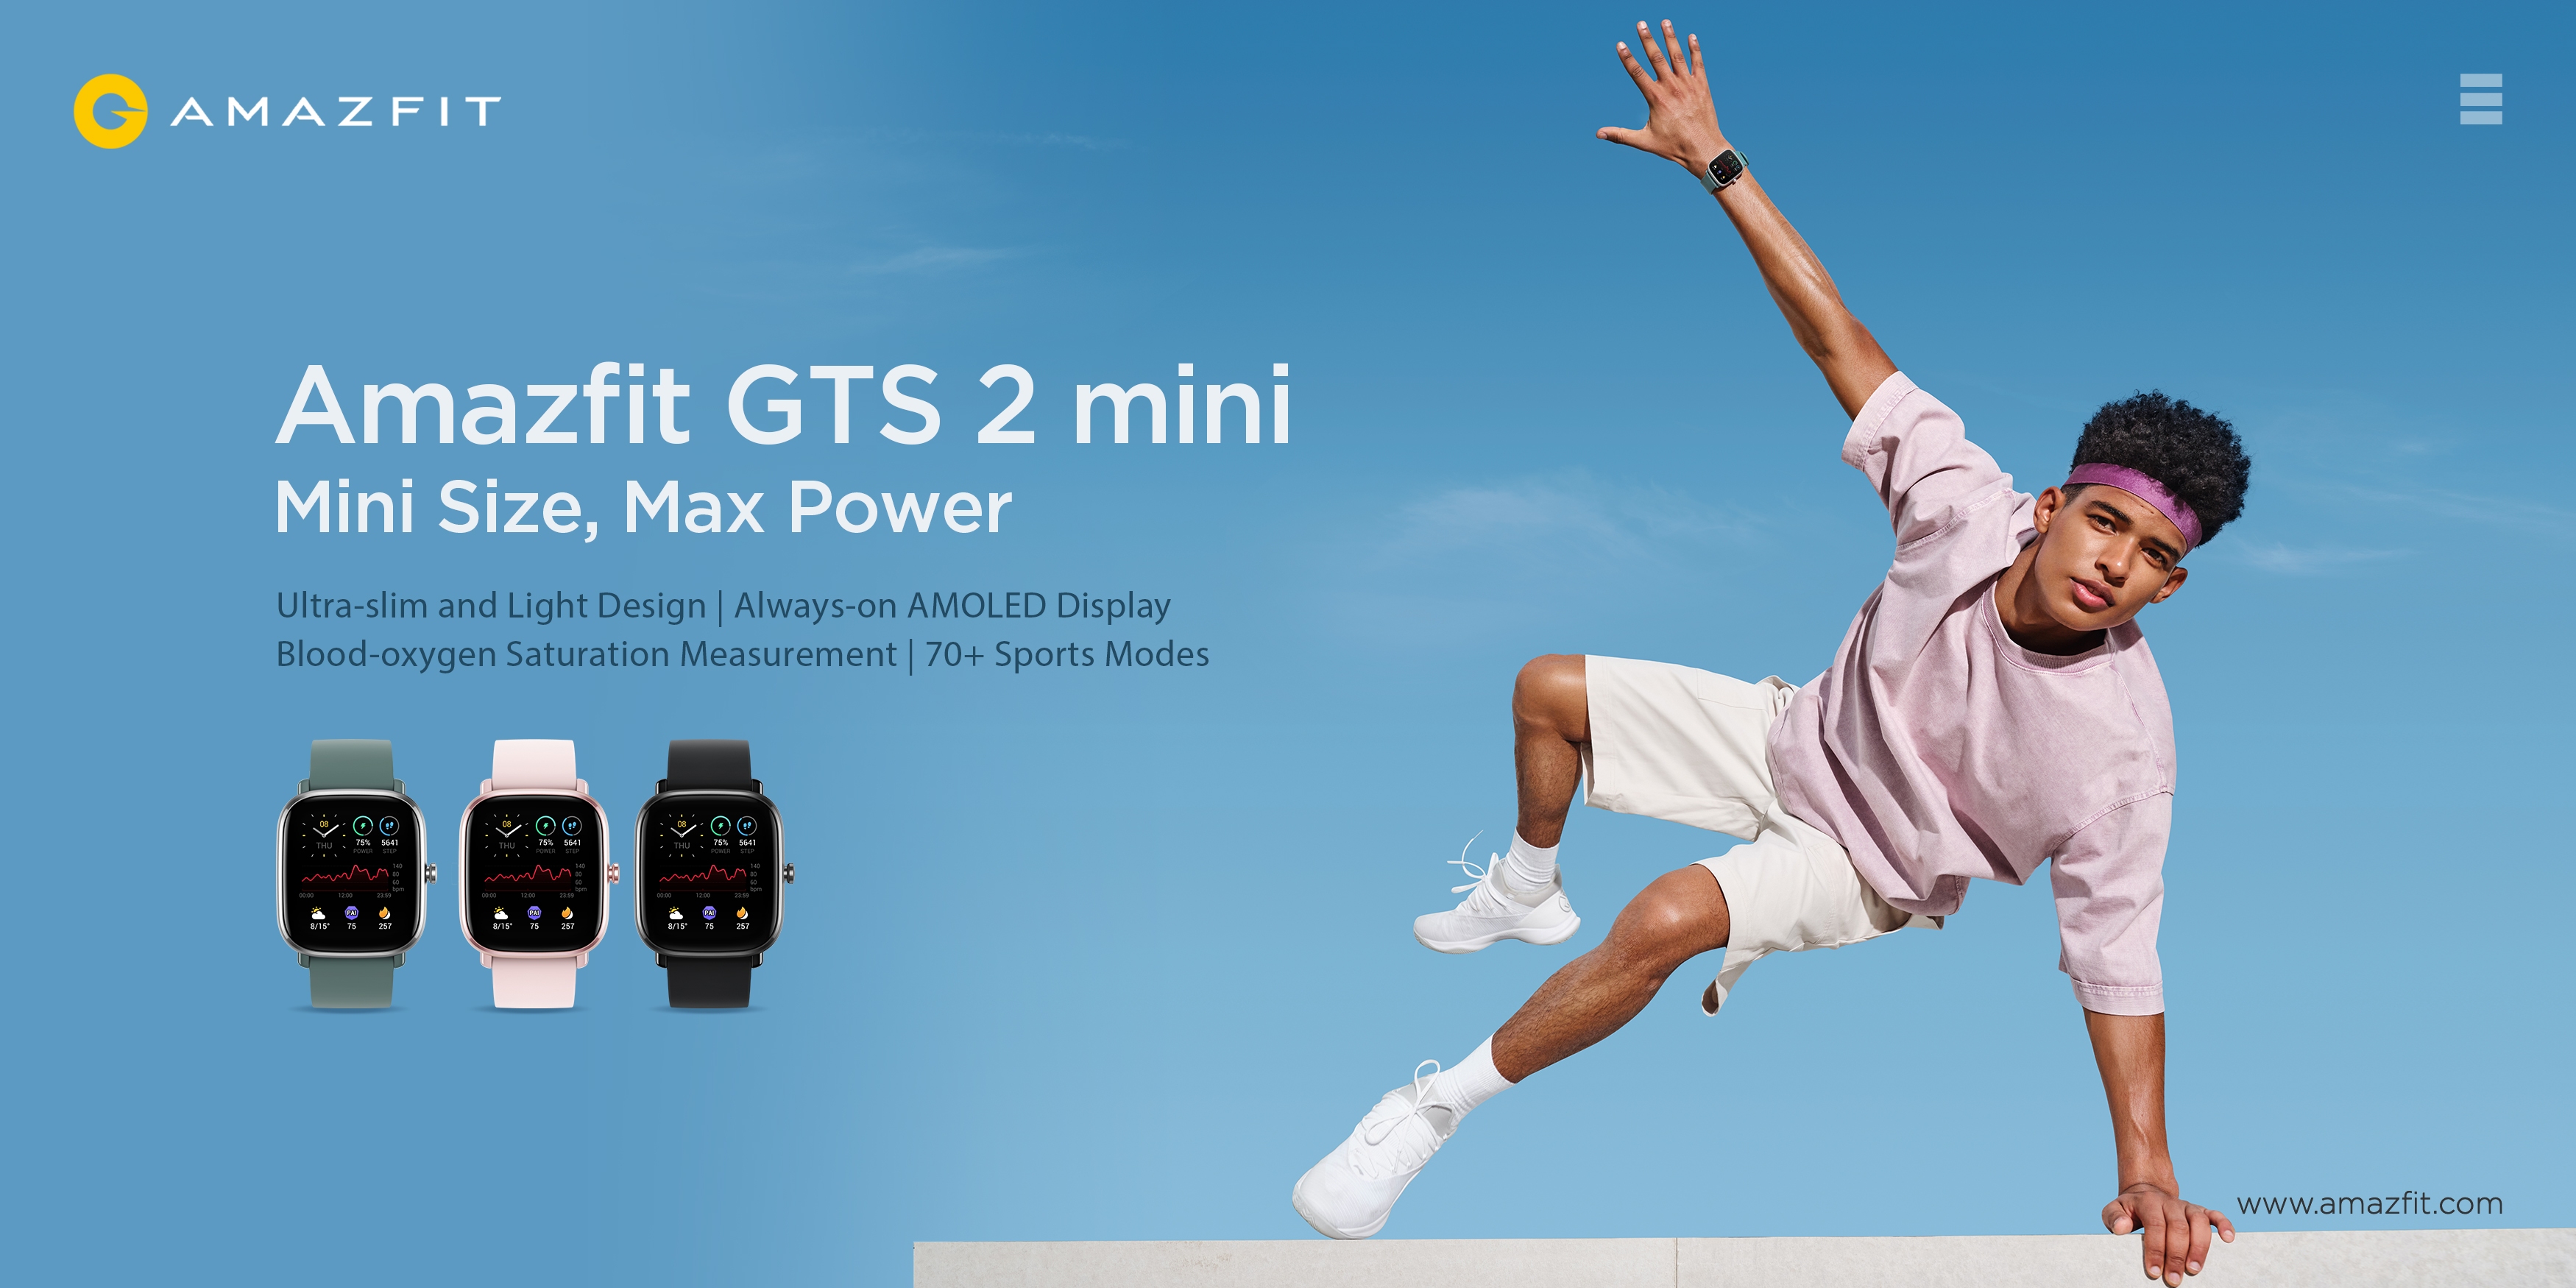 Amazfit Malaysia - For Smartwatch, Fitness Tracker, and More Health Monitoring Products